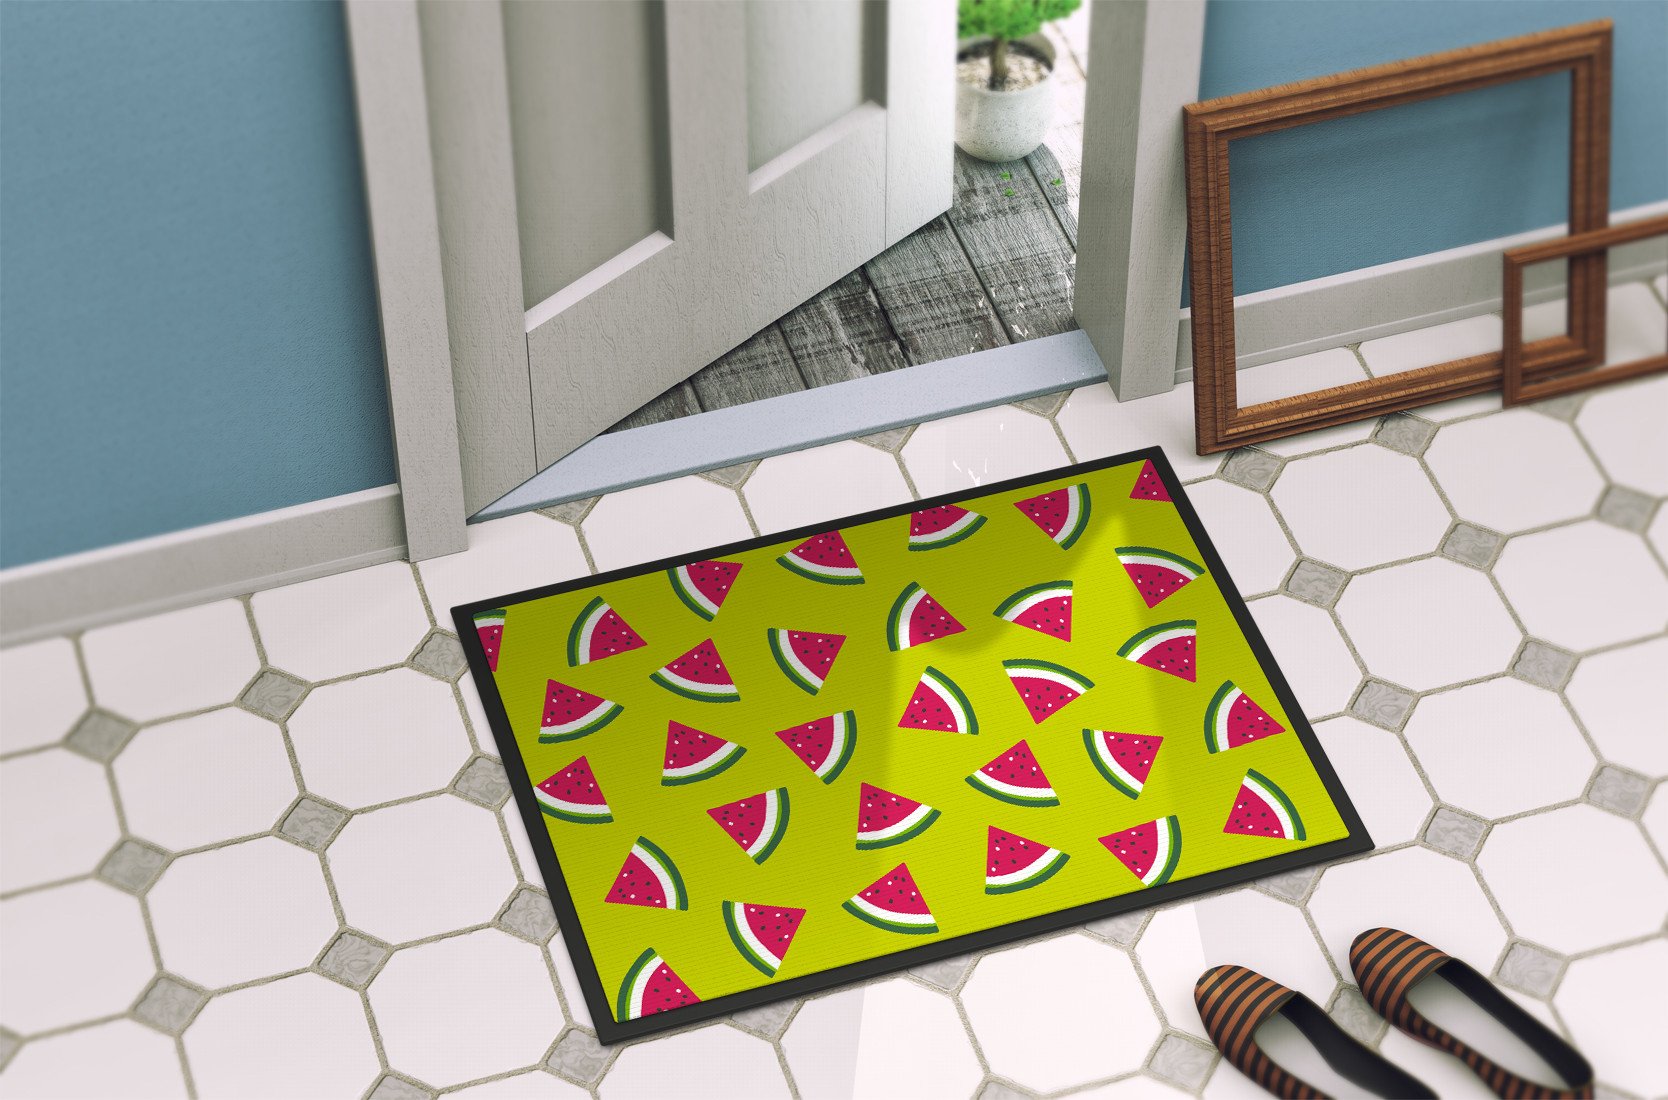 Watermelon on Lime Green Indoor or Outdoor Mat 24x36 BB5151JMAT by Caroline's Treasures